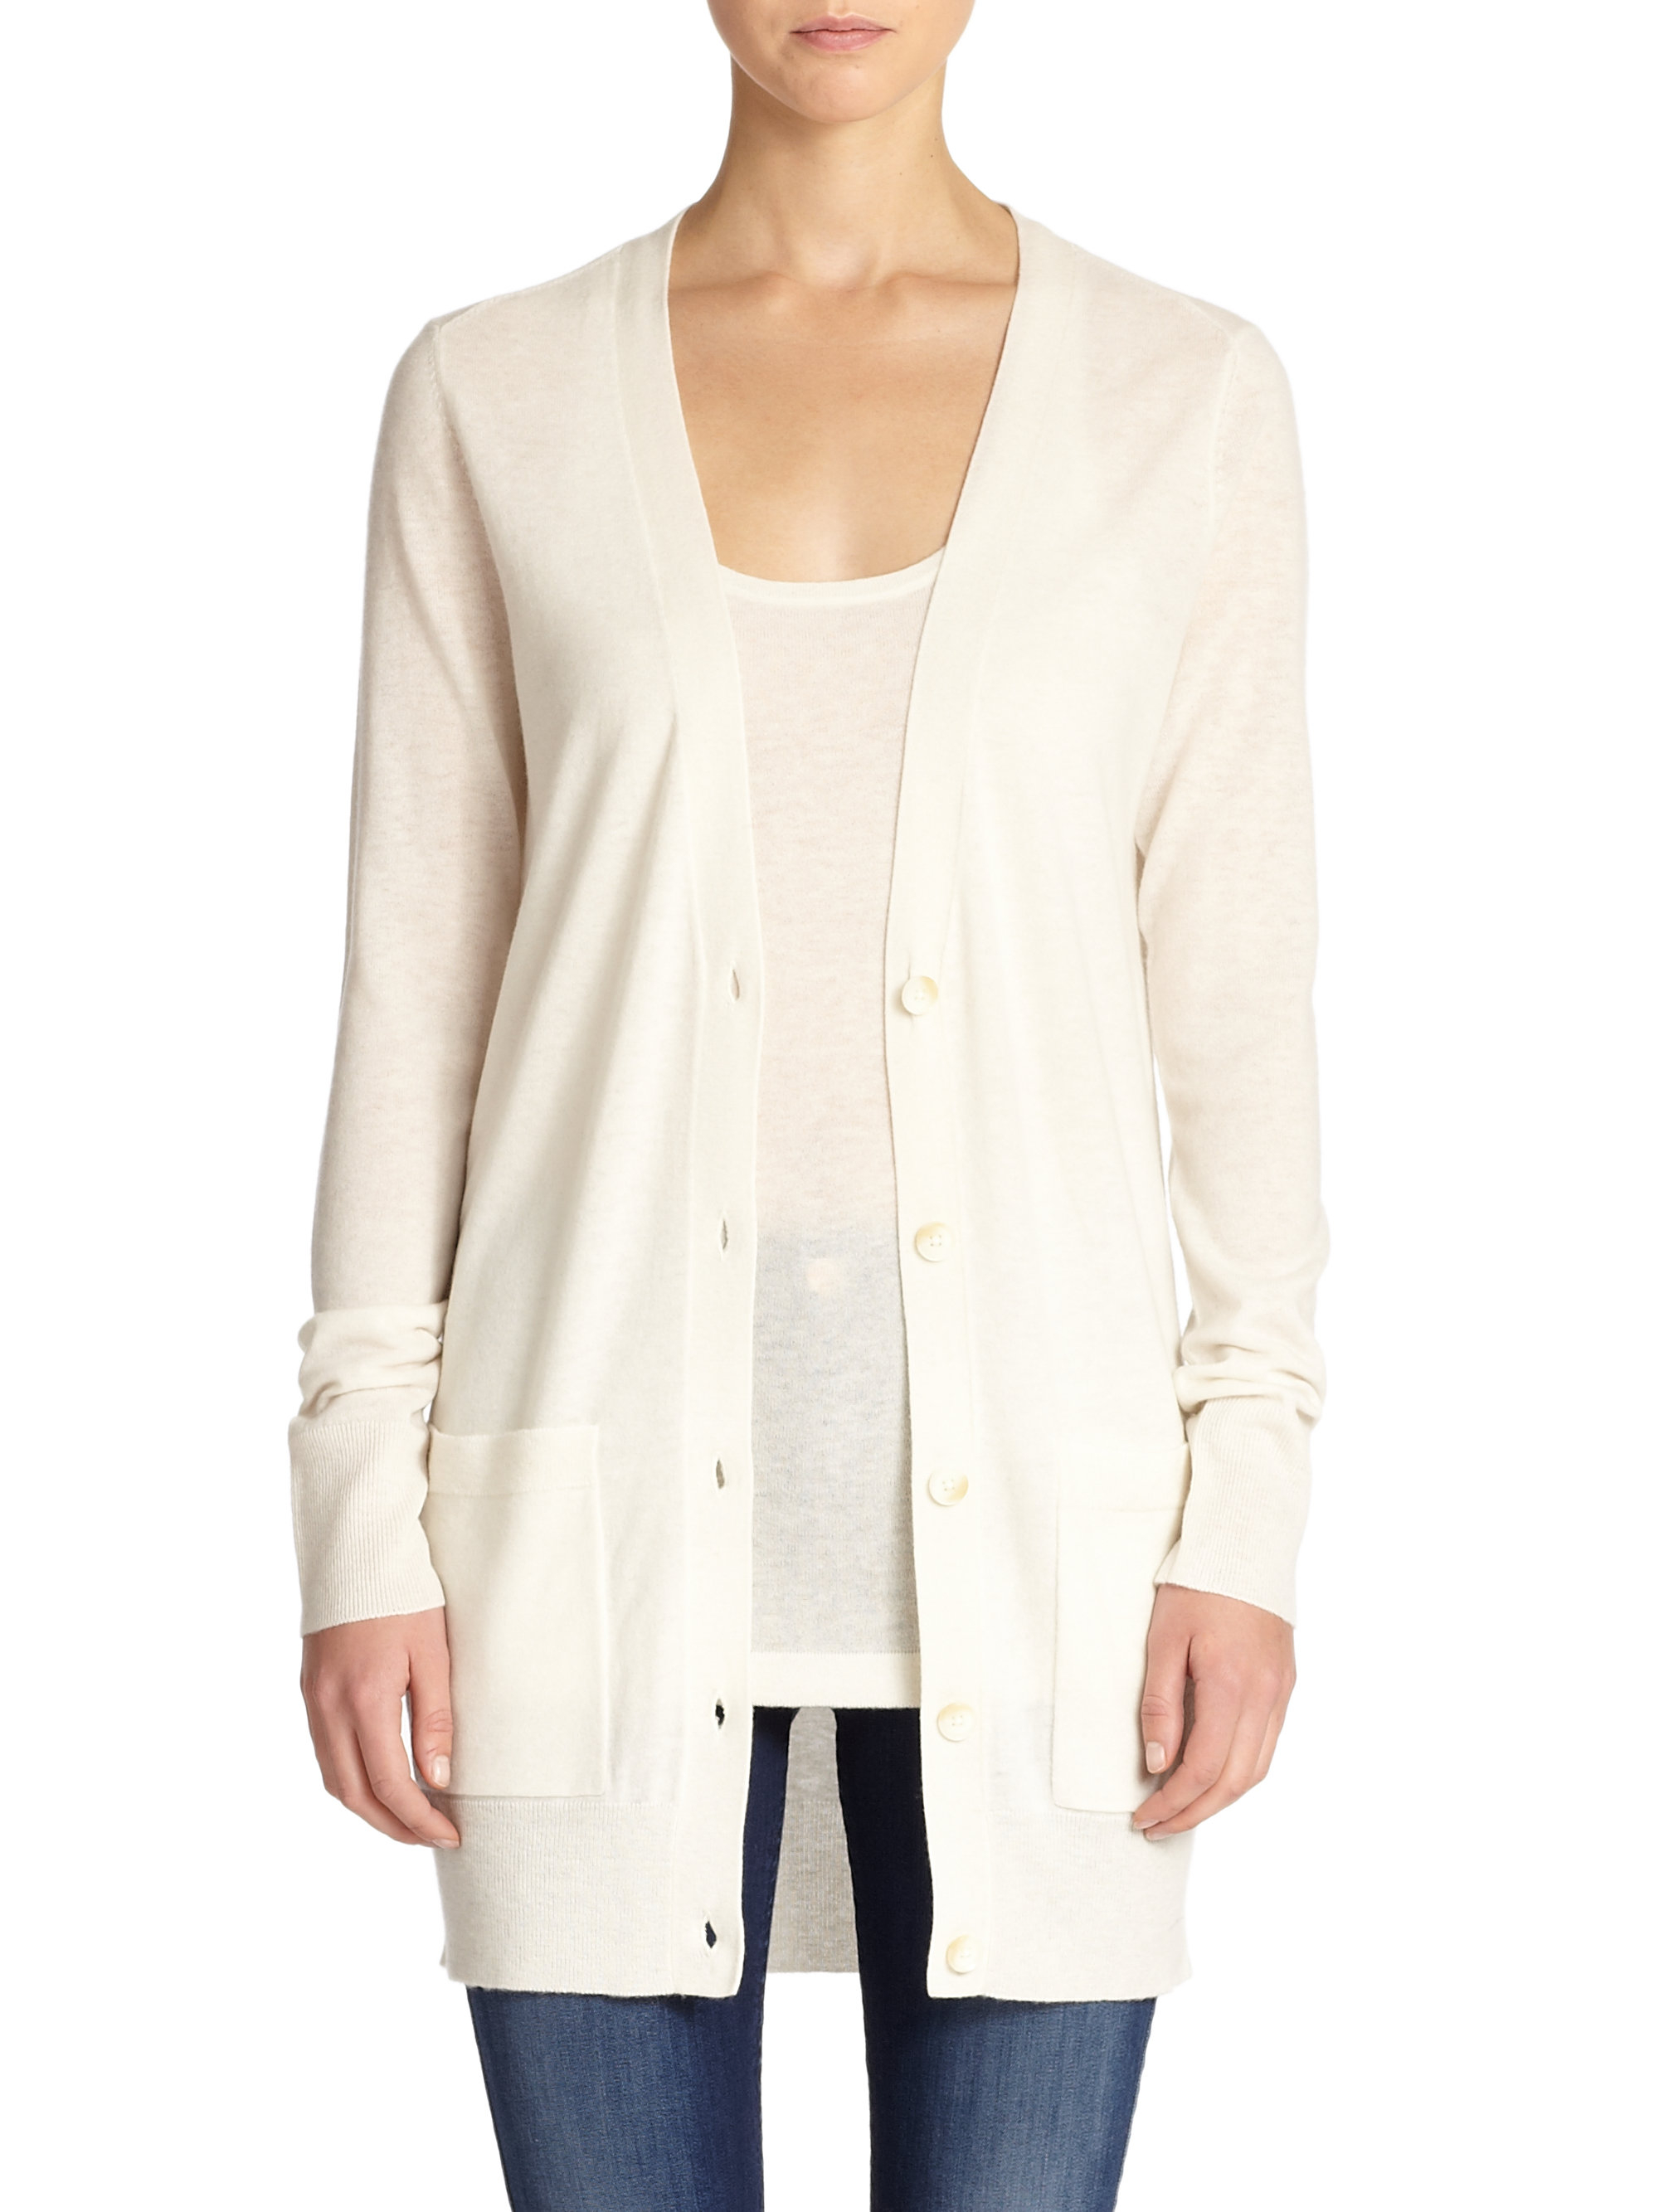 Saks fifth avenue Cashmere Long Cardigan in White | Lyst